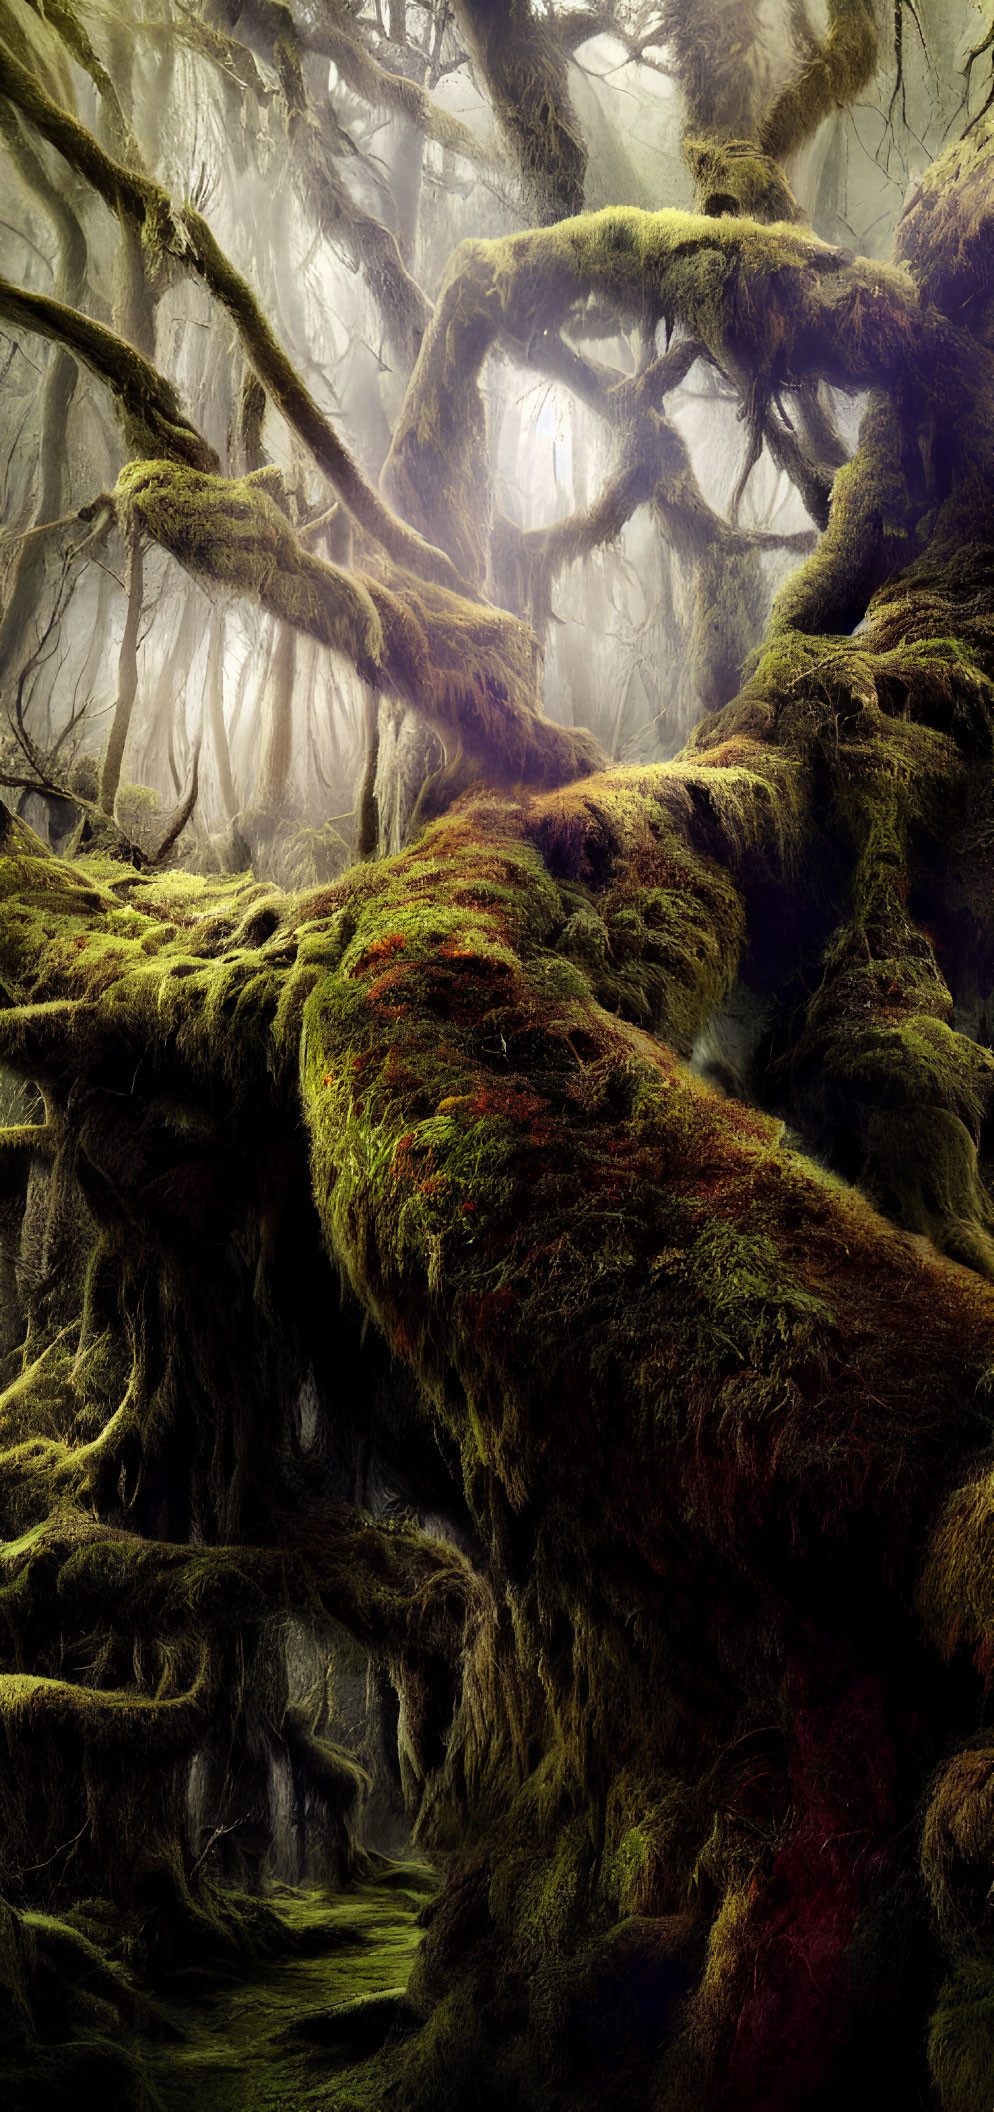 Mystic foggy forest with twisted moss-covered trees